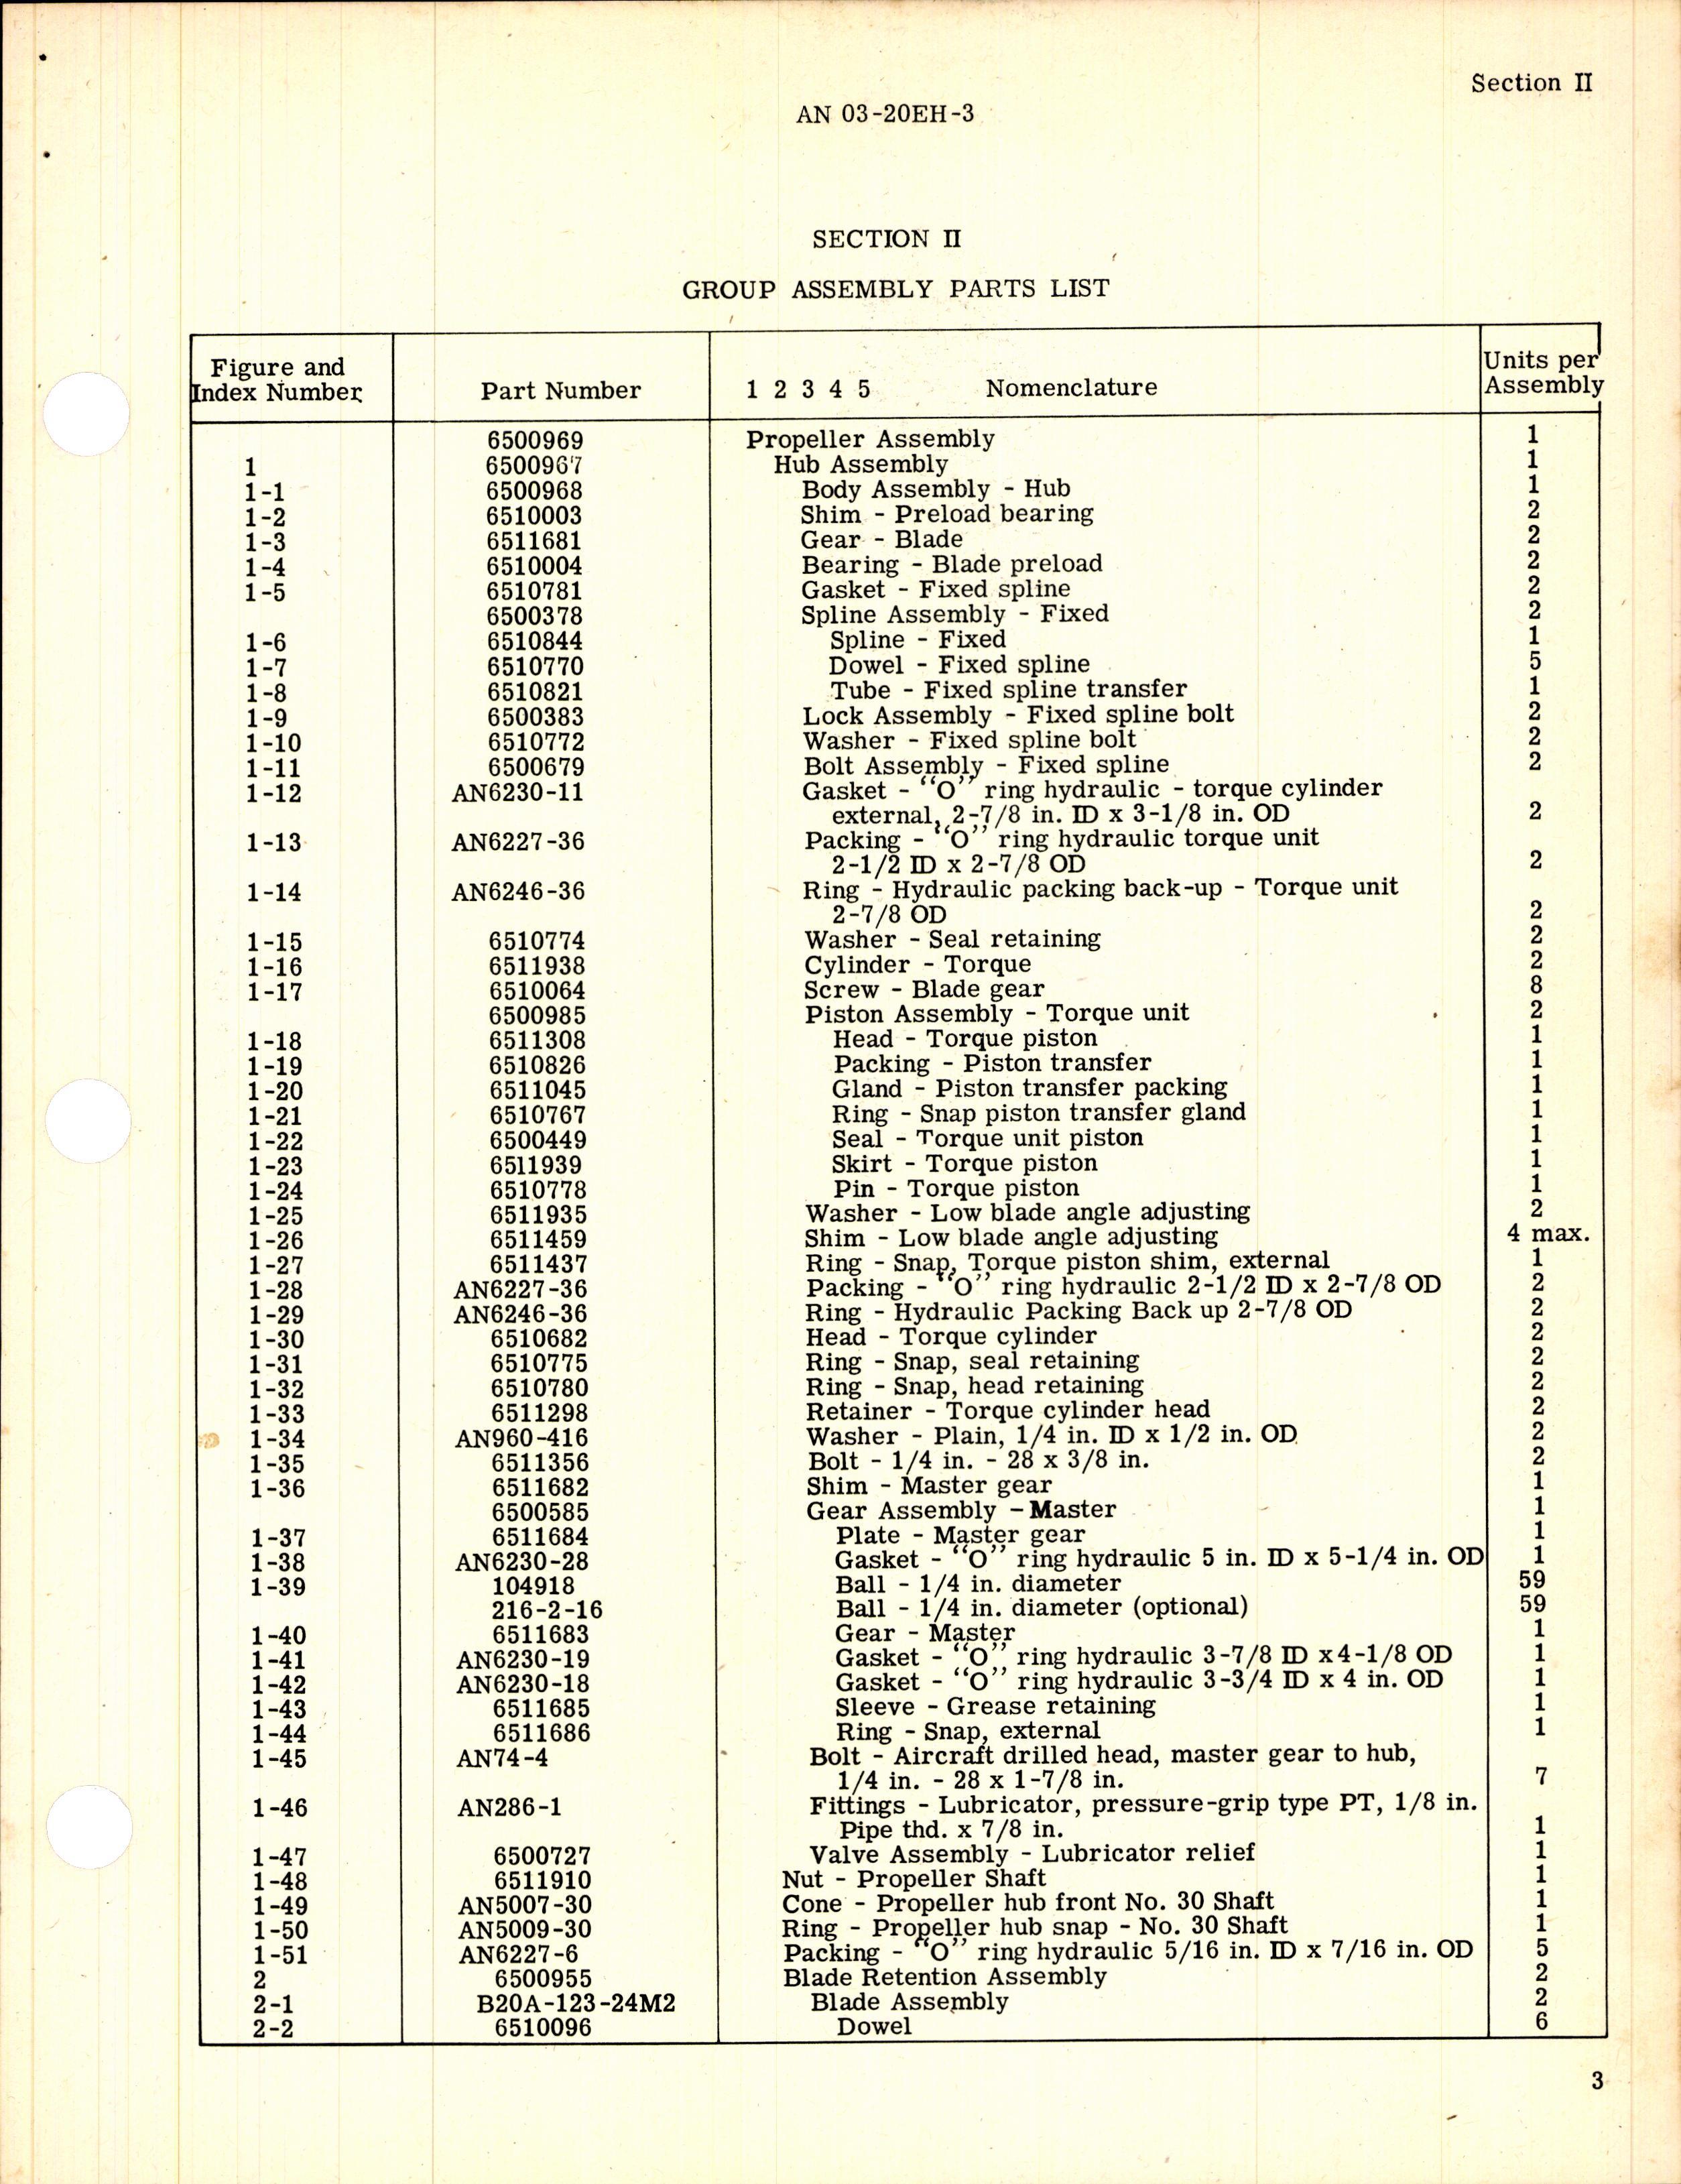 Sample page 5 from AirCorps Library document: Parts Catalog for Hydraulic Propeller Model A322F-A1